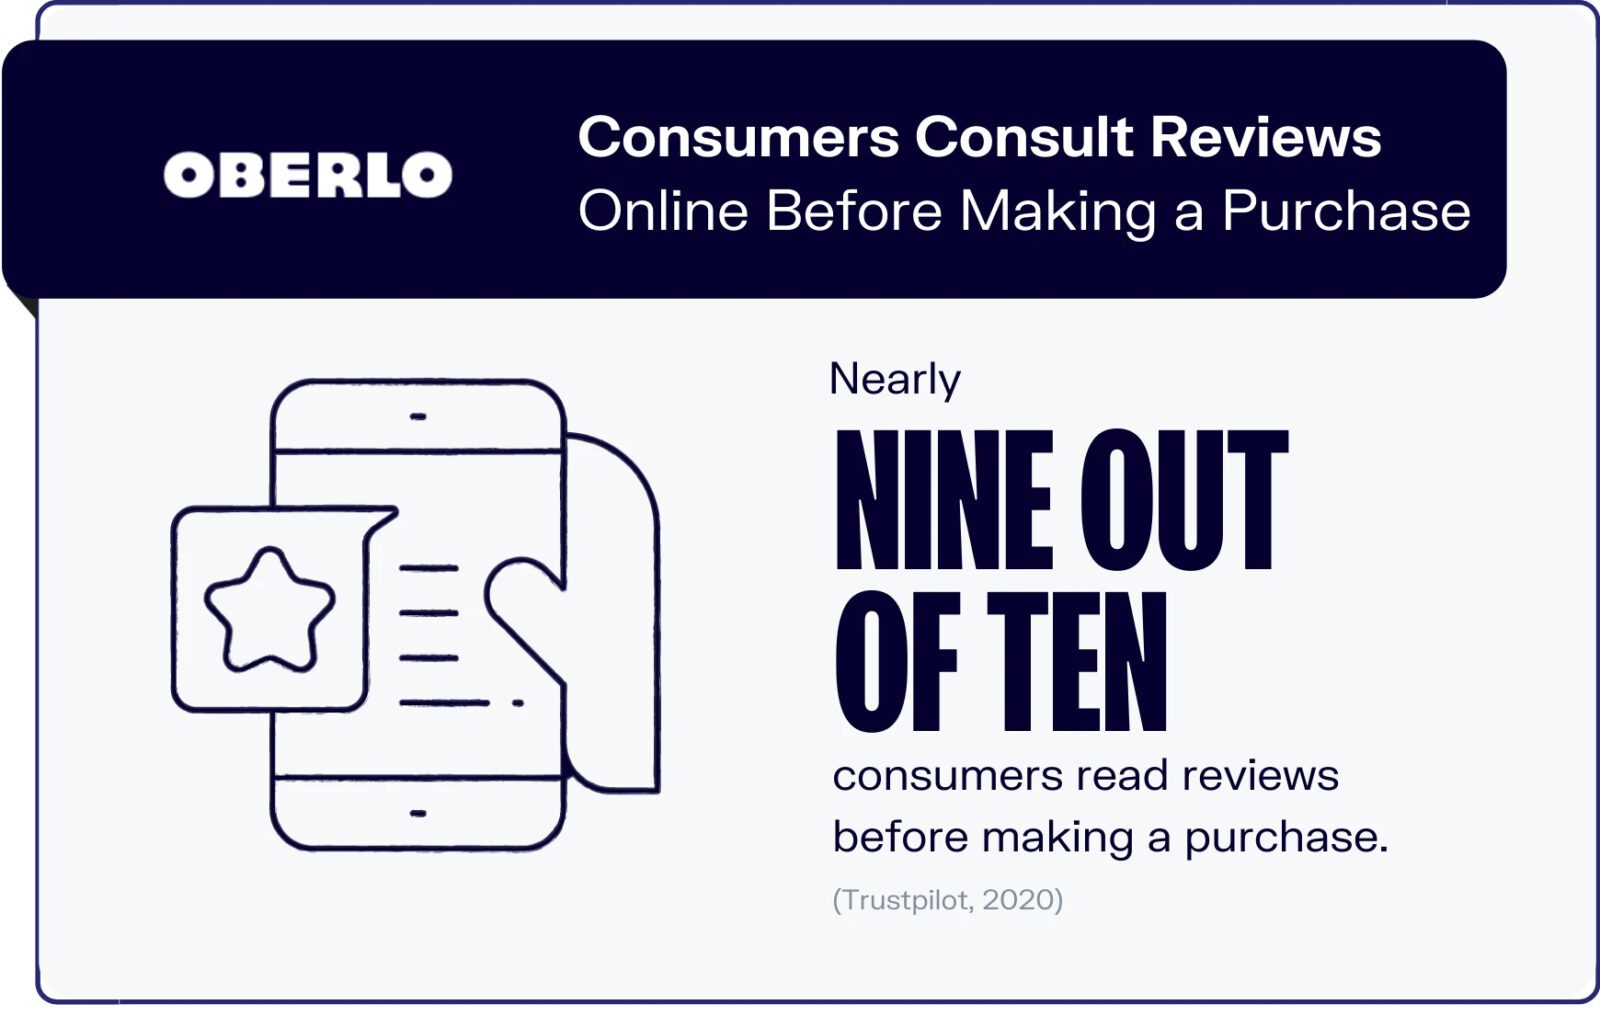 9 out of 10 consumers read reviews before making a purchase